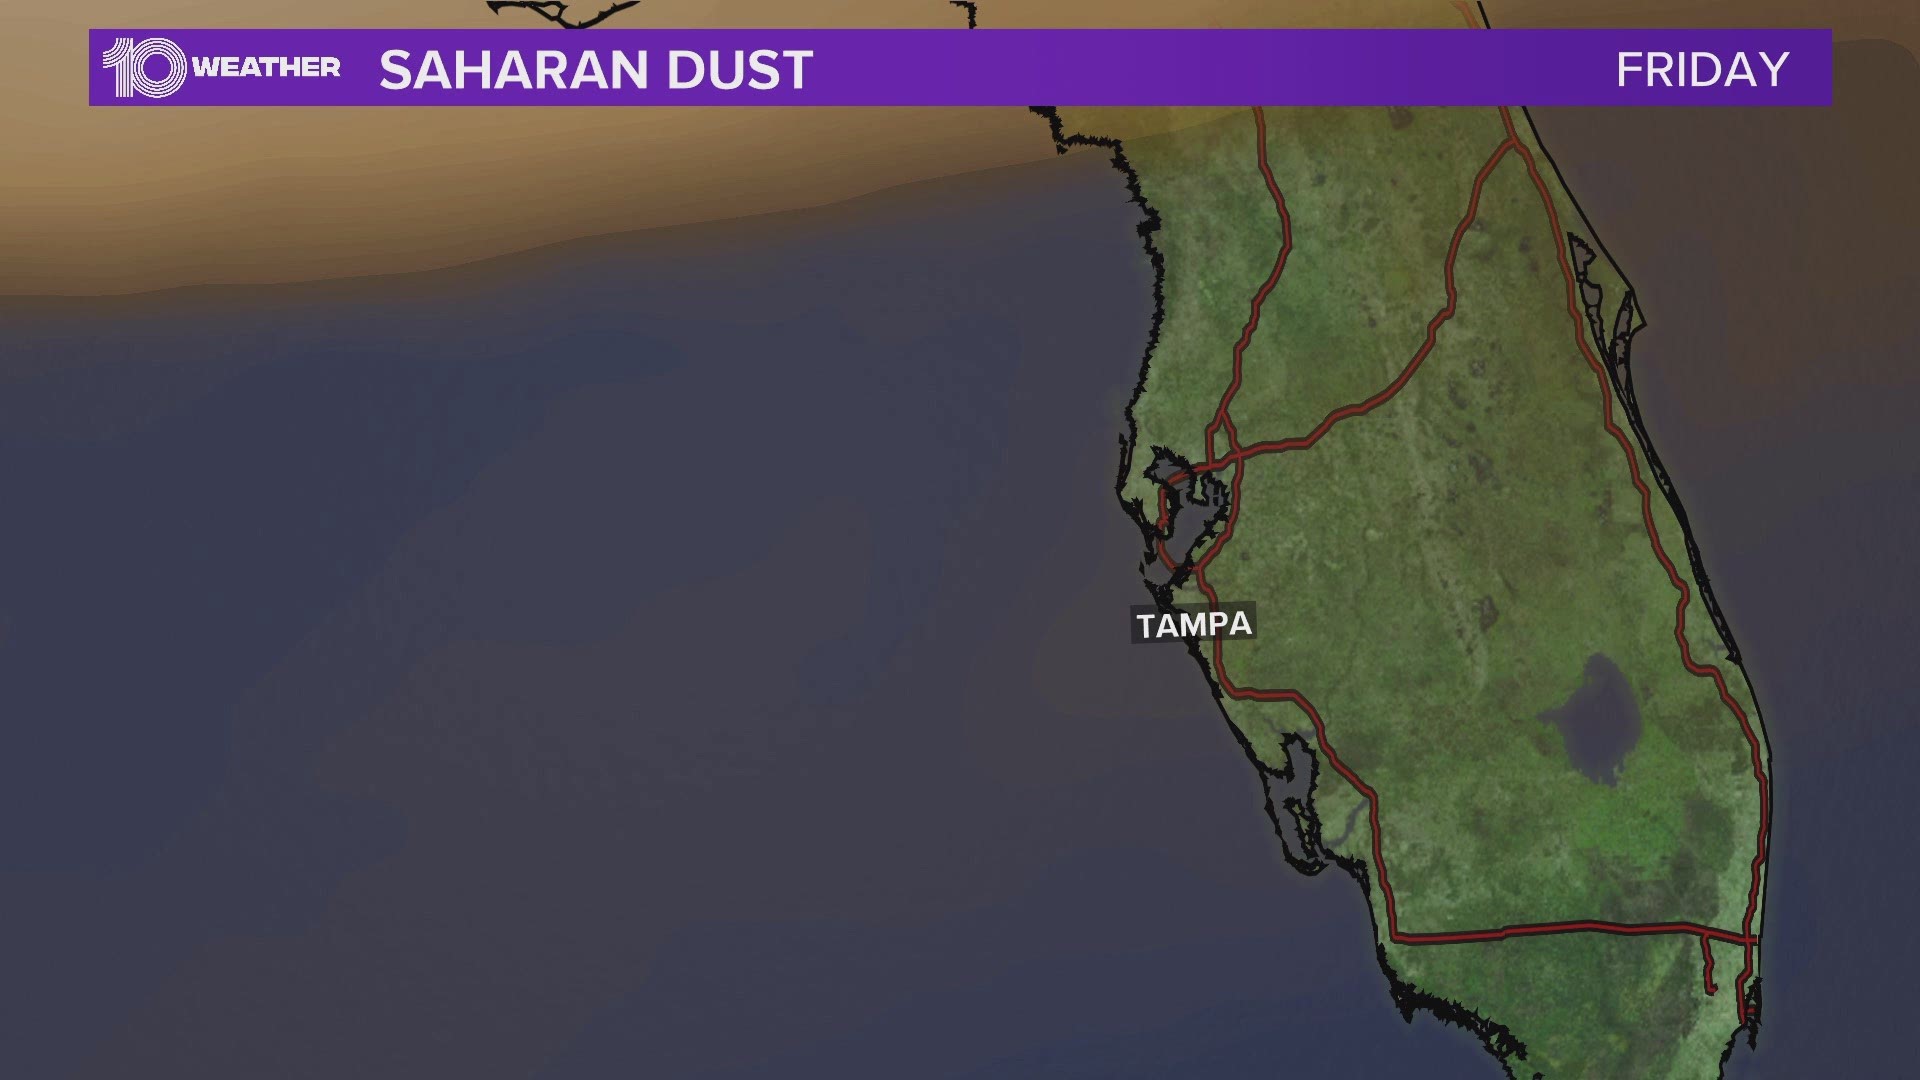 The much discussed giant cloud of dust from the Sahara Desert in Africa has made it into the Gulf of Mexico, and it’s set to hang around well into next week.